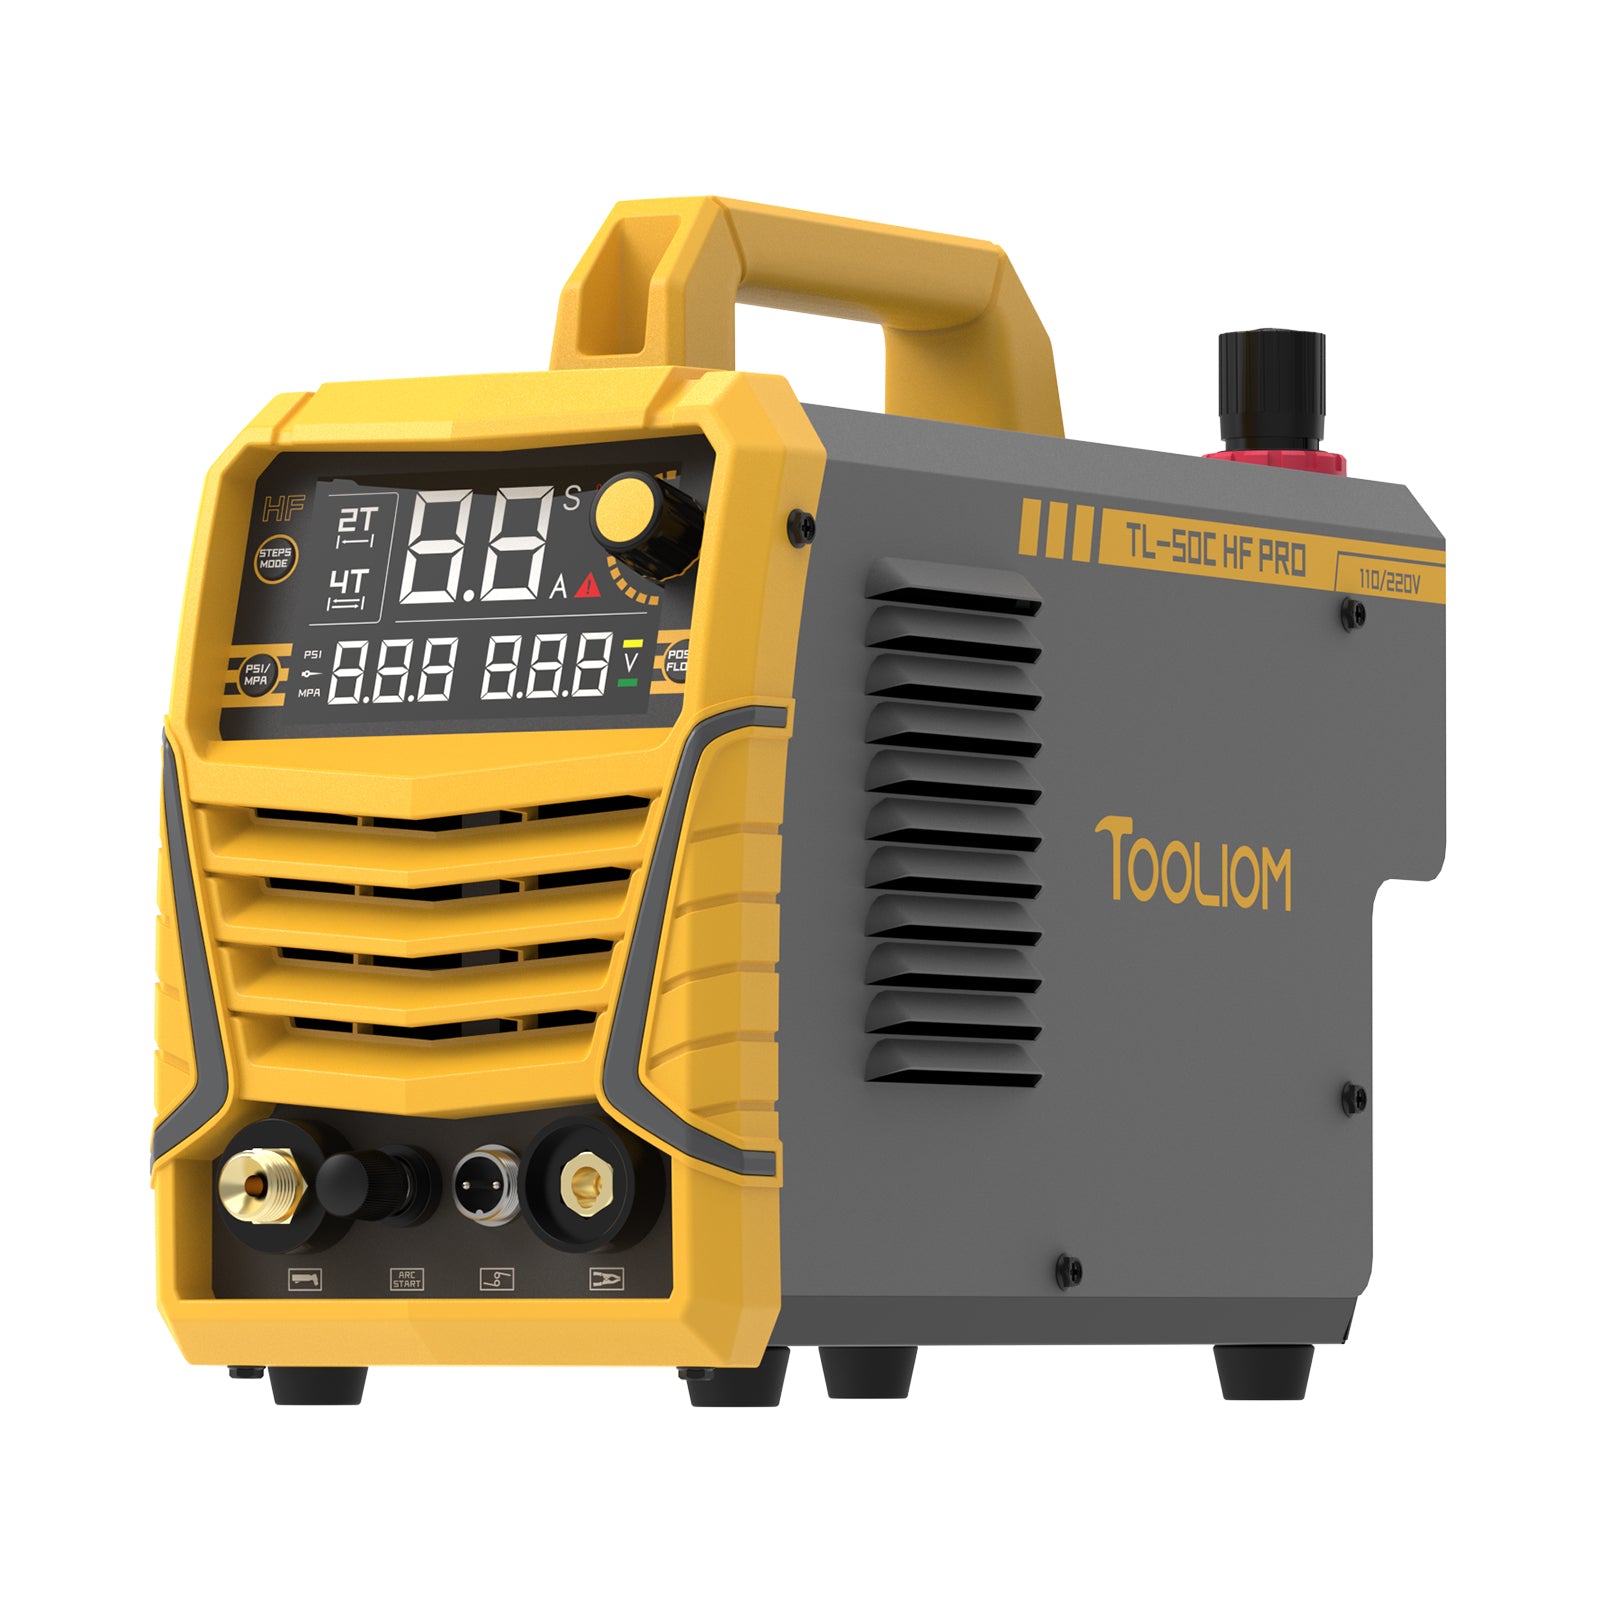 TOOLIOM 50A Plasma Cutter High Frequency Non-Touch Plasma Cutting Machine 4/5" Maximum Severance Cut with Post Flow Gas and 2T/4T,Dual Voltage 110/220V